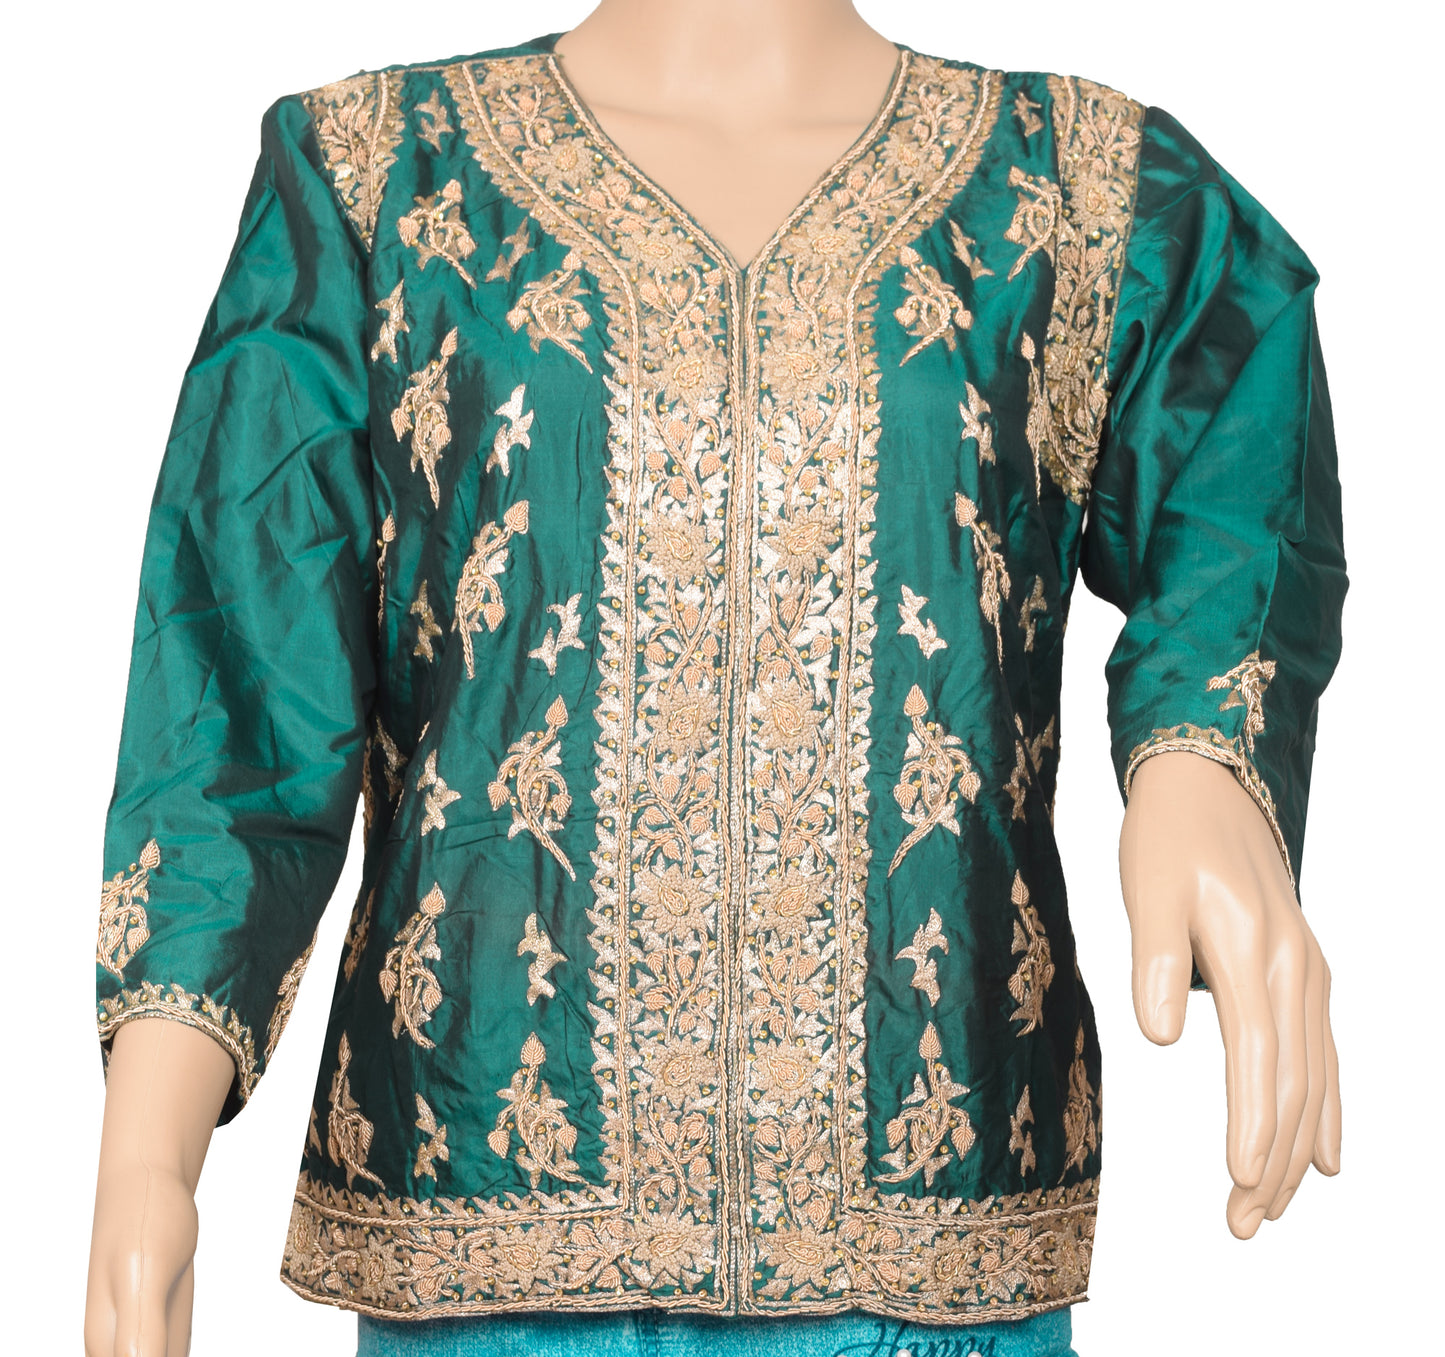 Bottle Green Short Kurti Stitched Sari Blouse Pure Silk Hand Beaded Floral Top